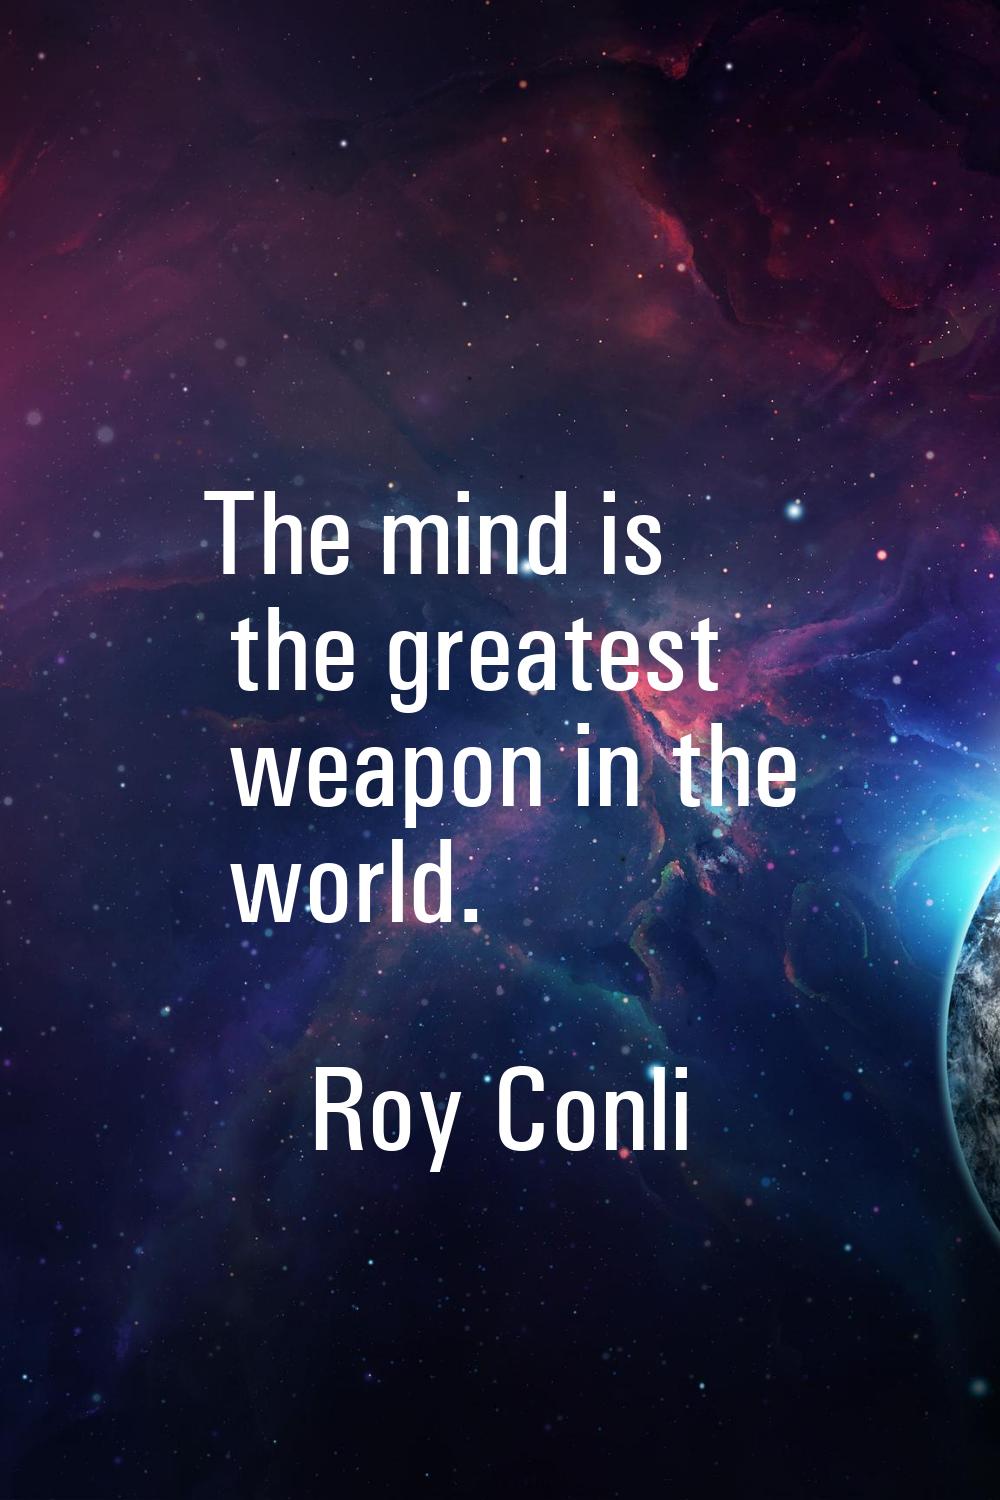 The mind is the greatest weapon in the world.